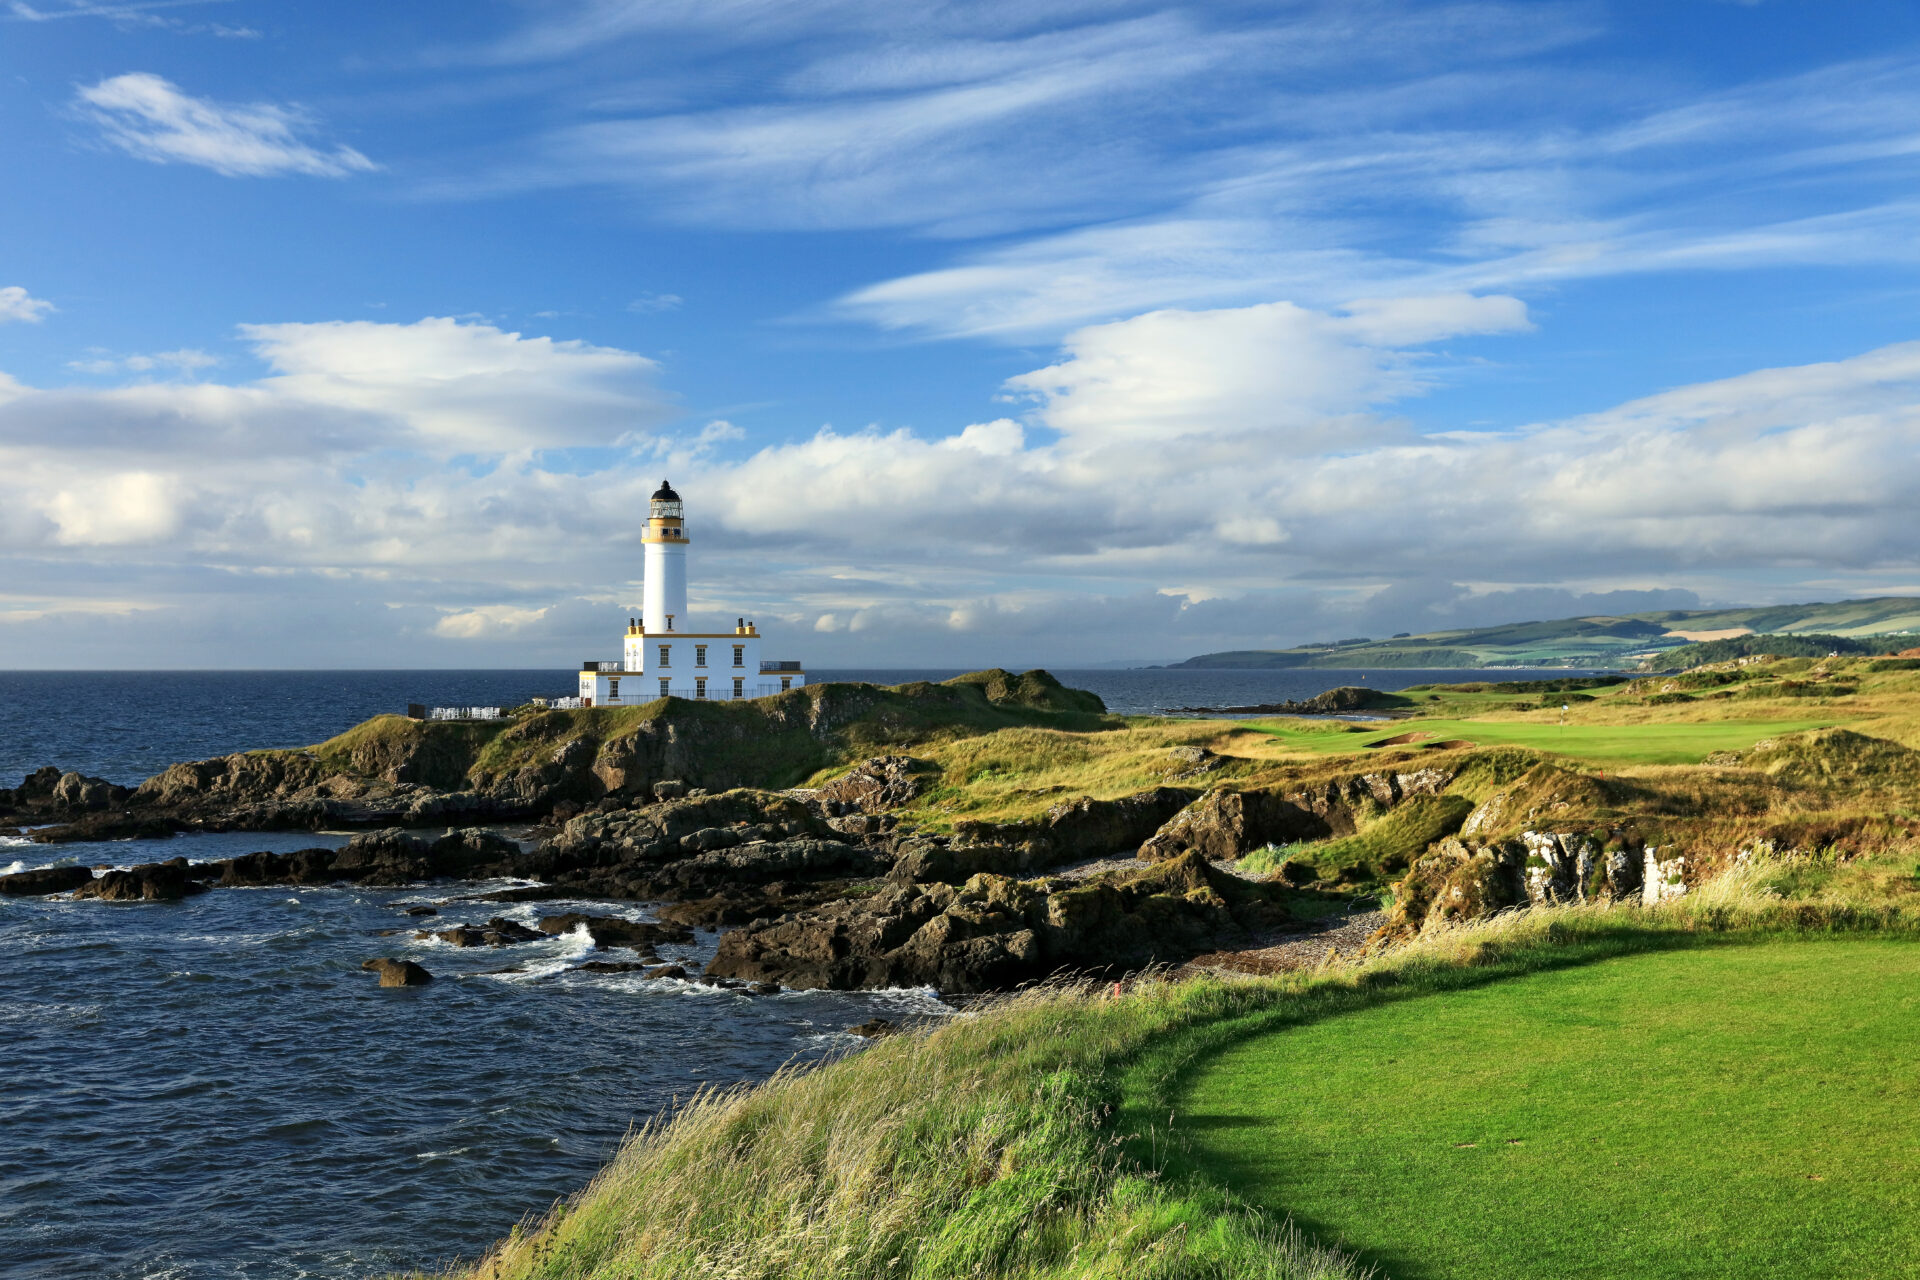 of the Ailsa Course at the Trump Turnberry Resort on April 26, 2016 in Turnberry, Scotland.